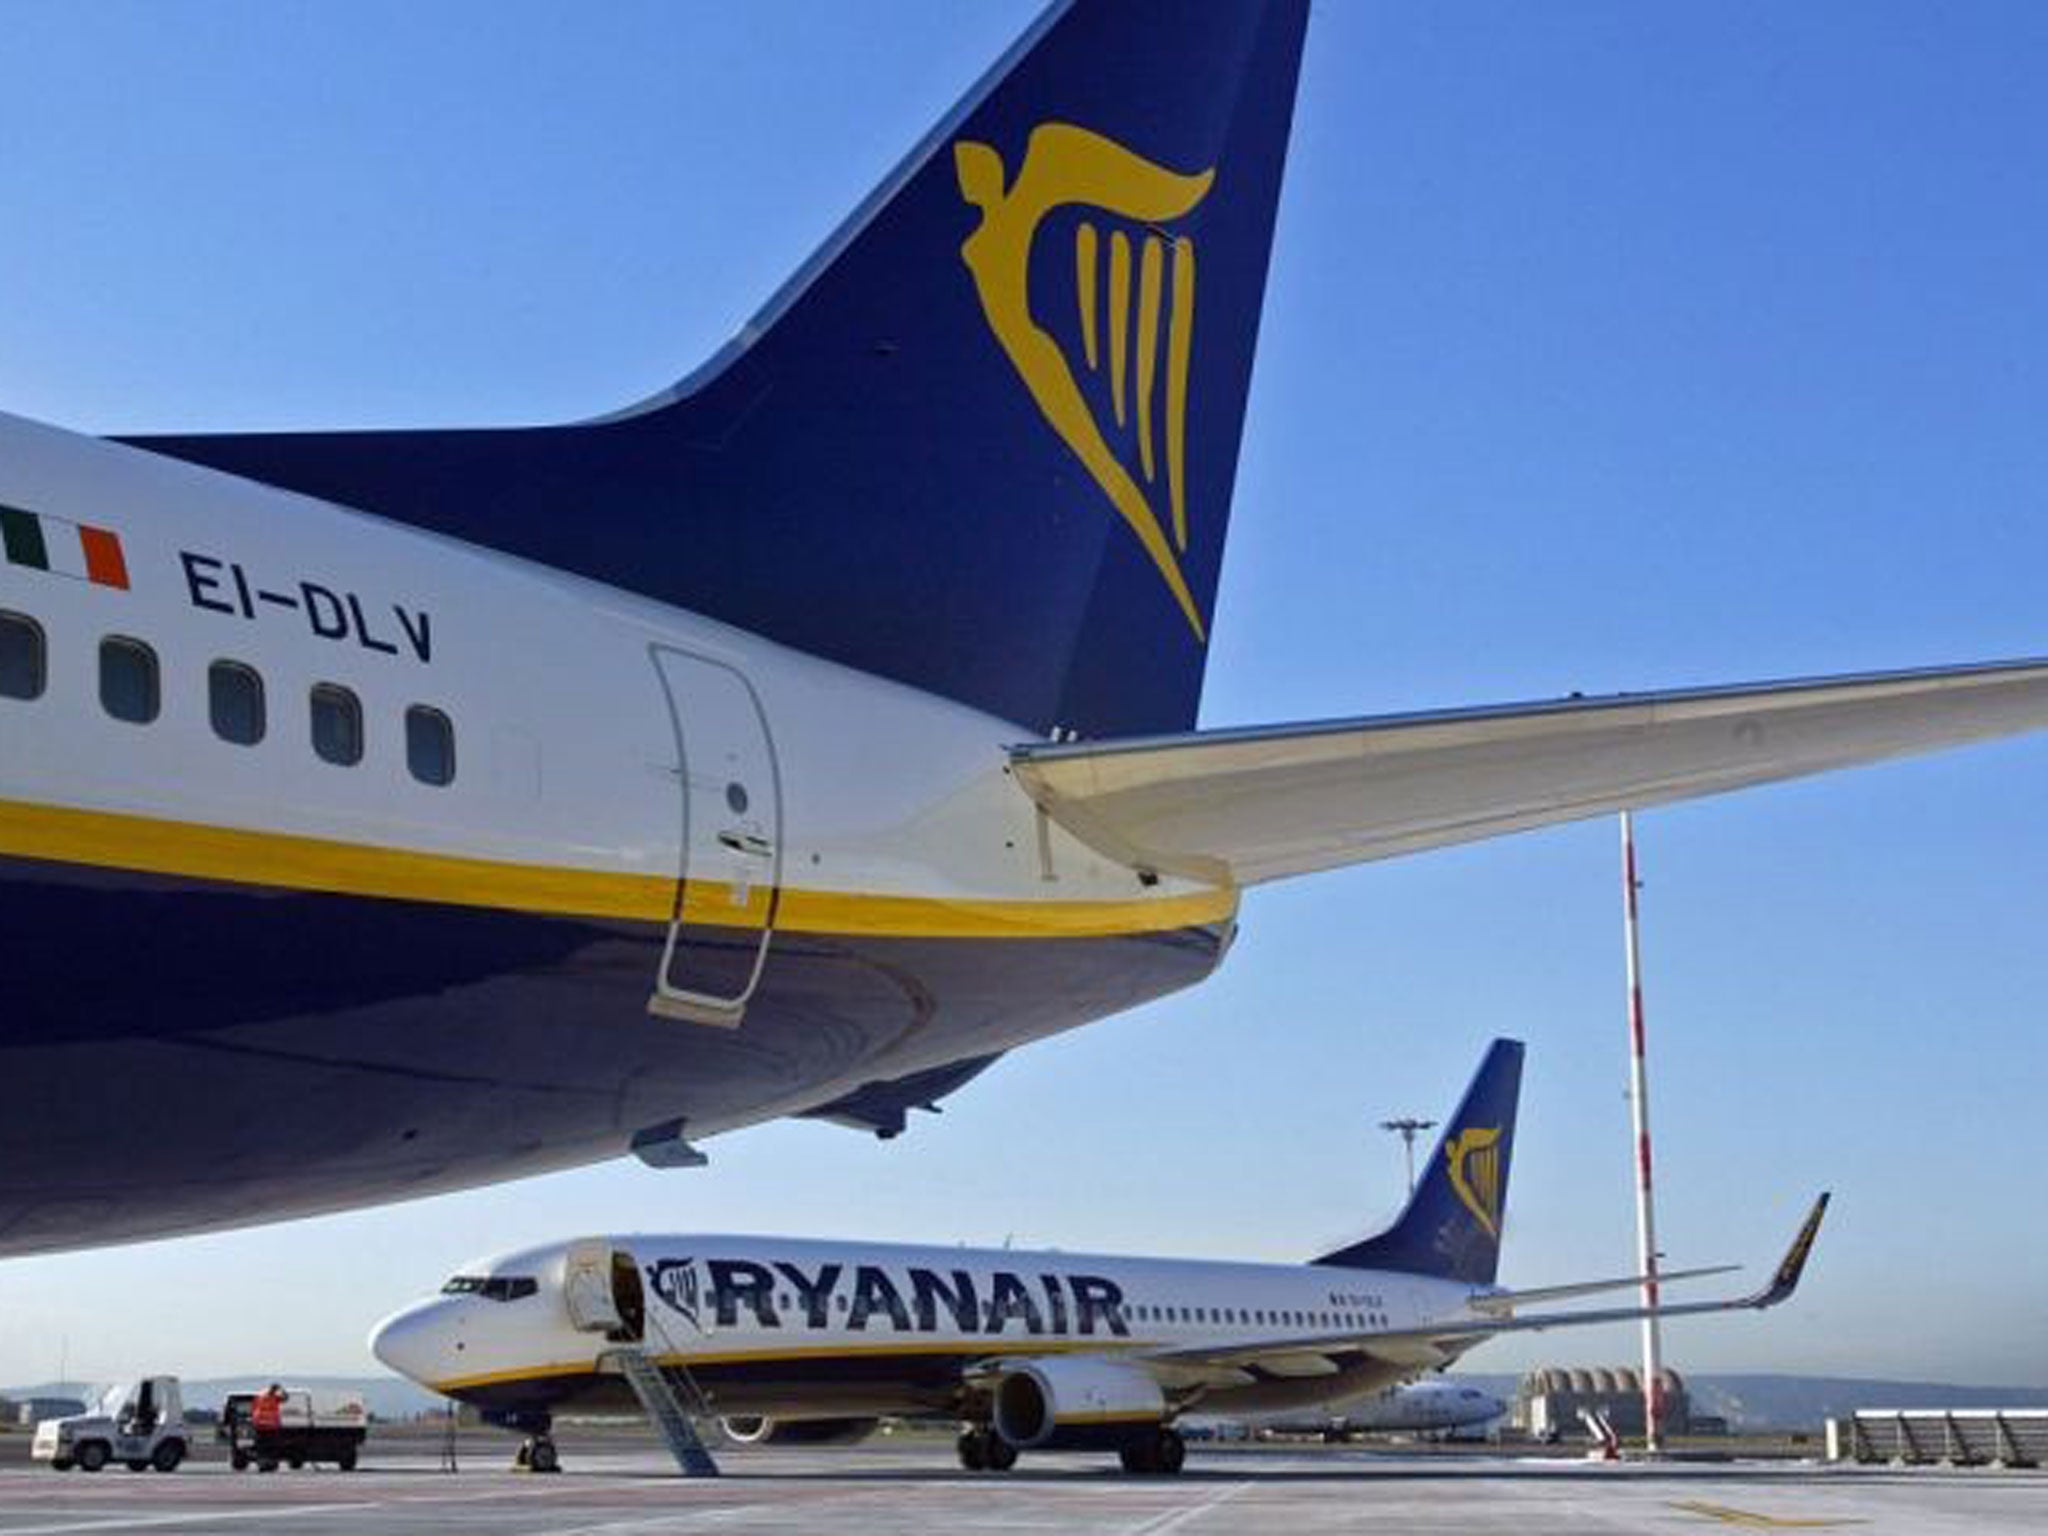 Ryanair already has a patchy reputation for customer service